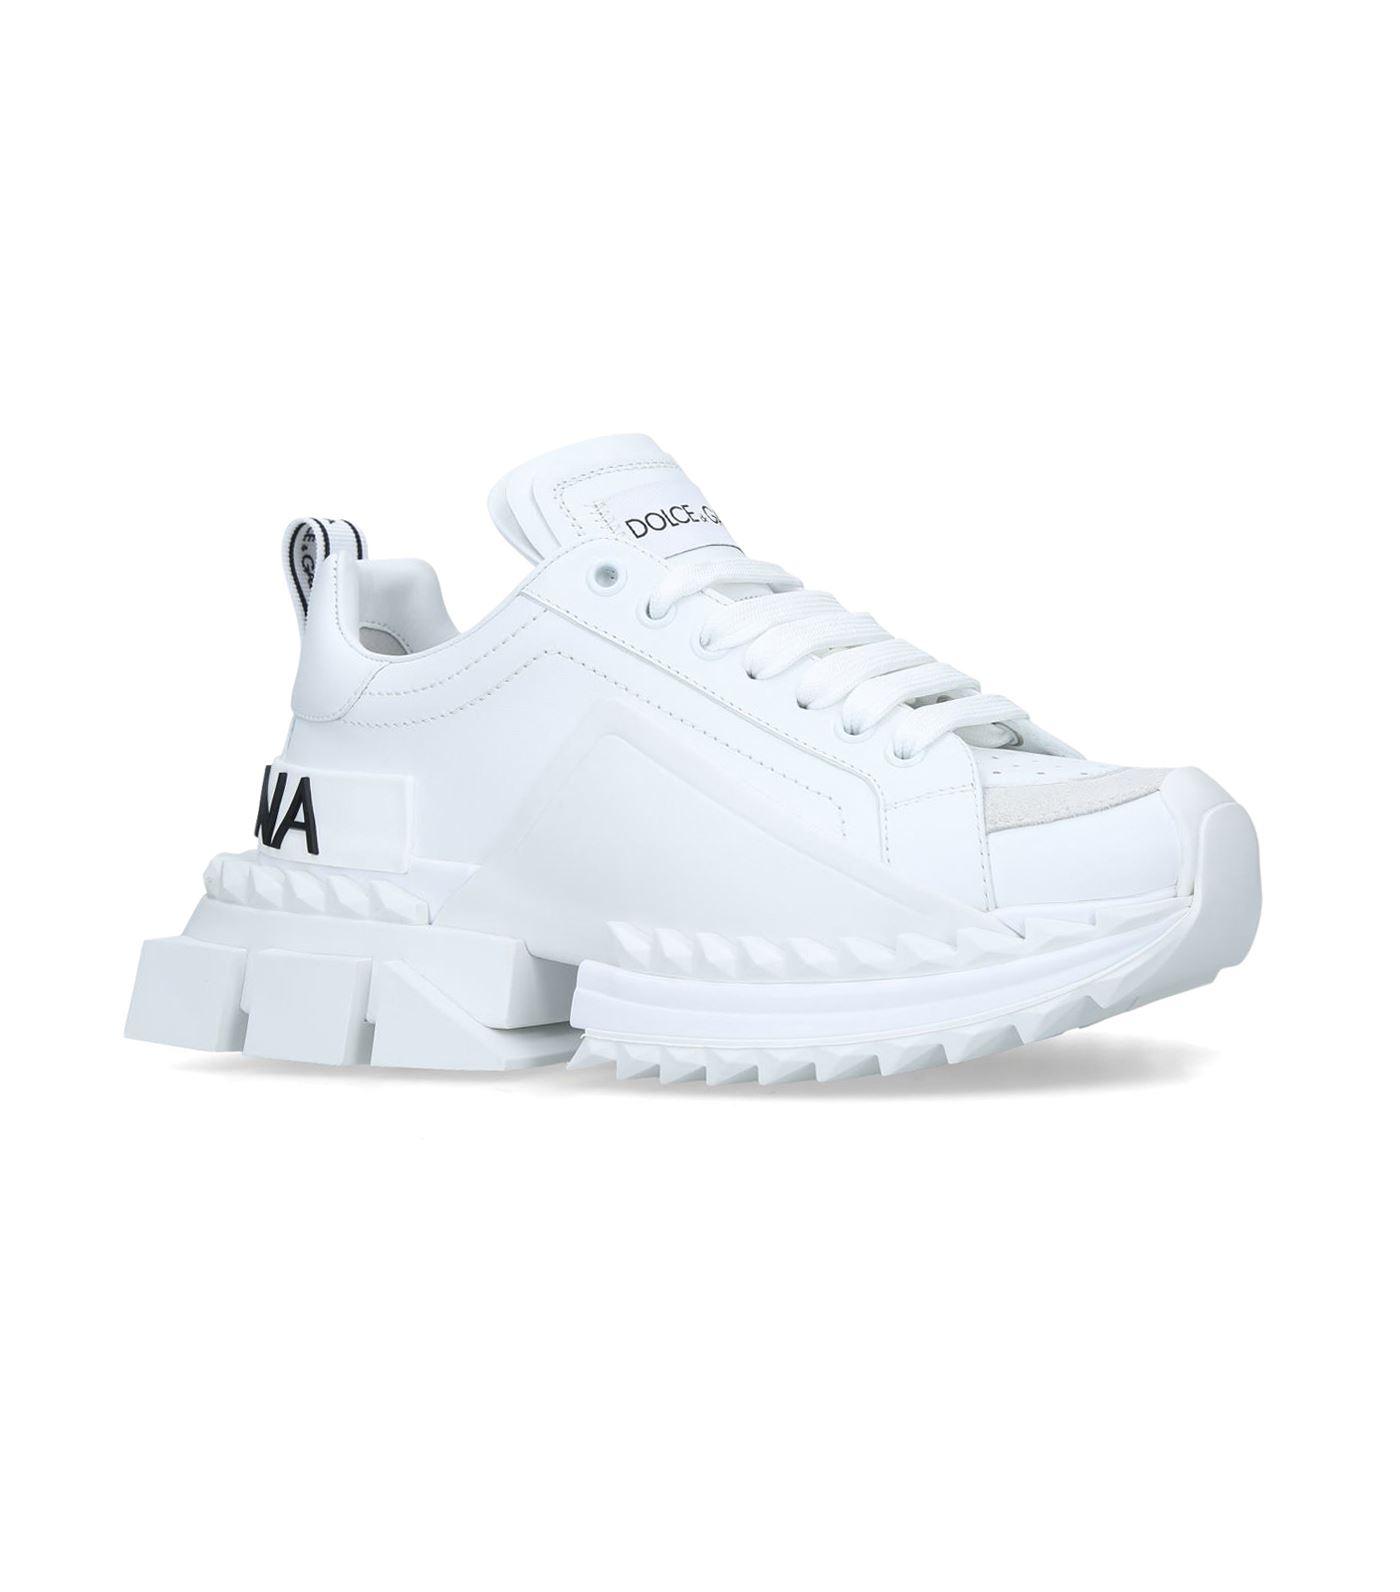 Dolce & Gabbana Super King Sneakers in White - Lyst